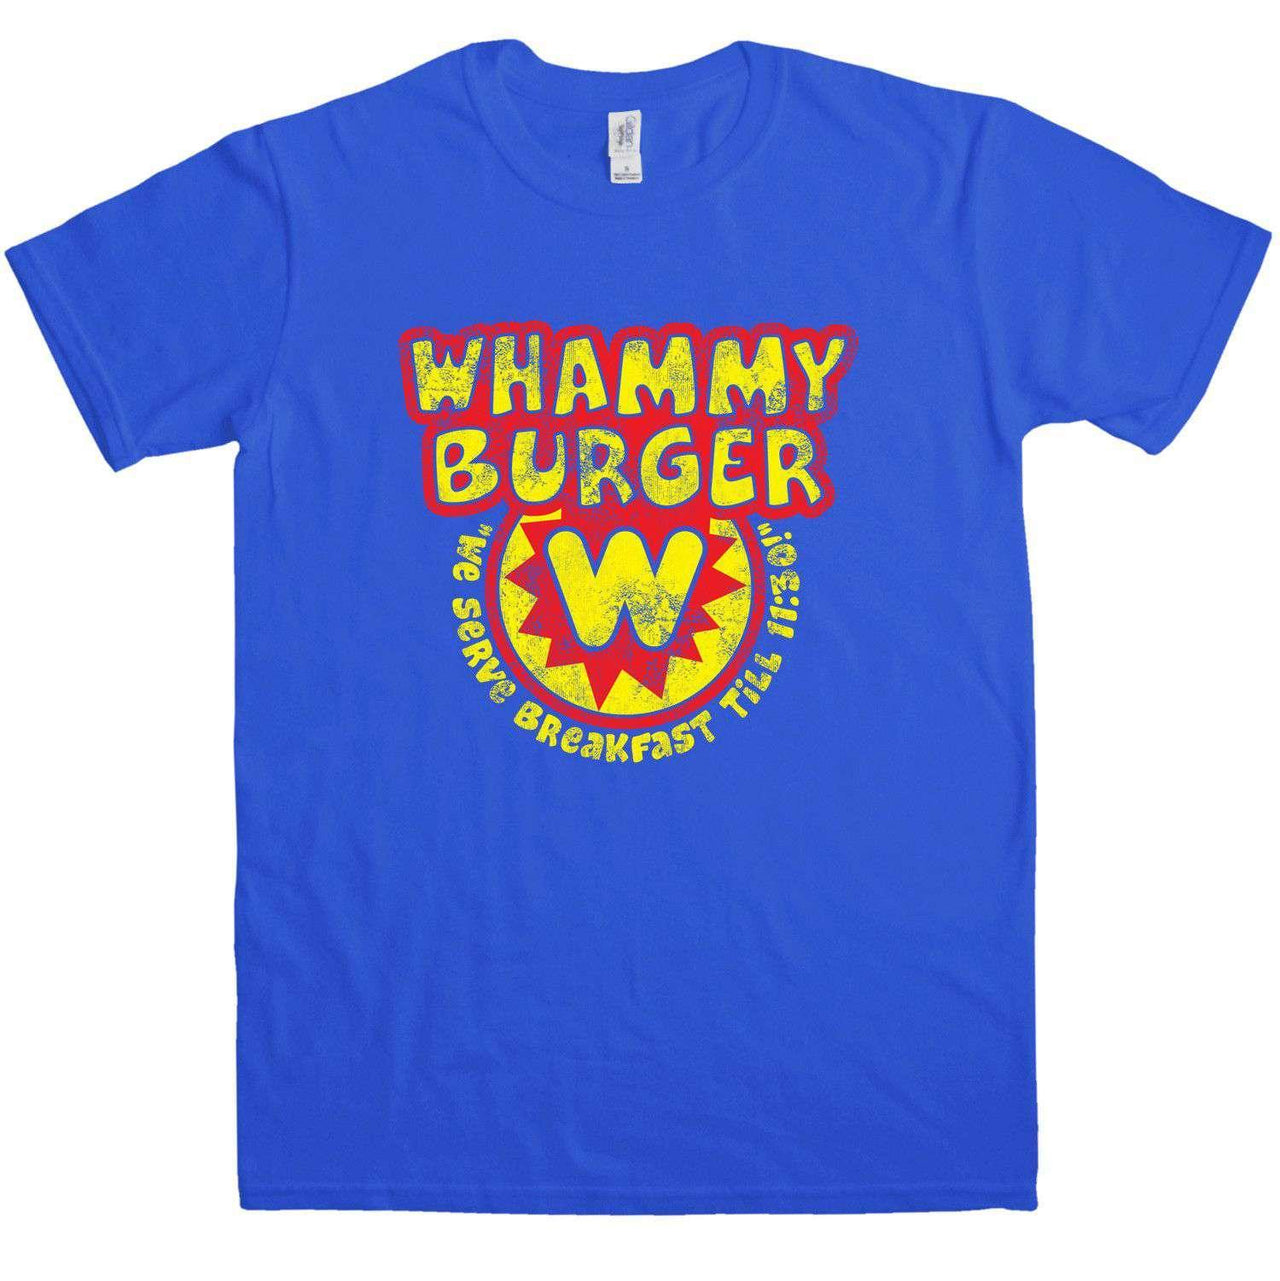 Whammy Burger Unisex T-Shirt For Men And Women, Inspired By Falling Down 8Ball